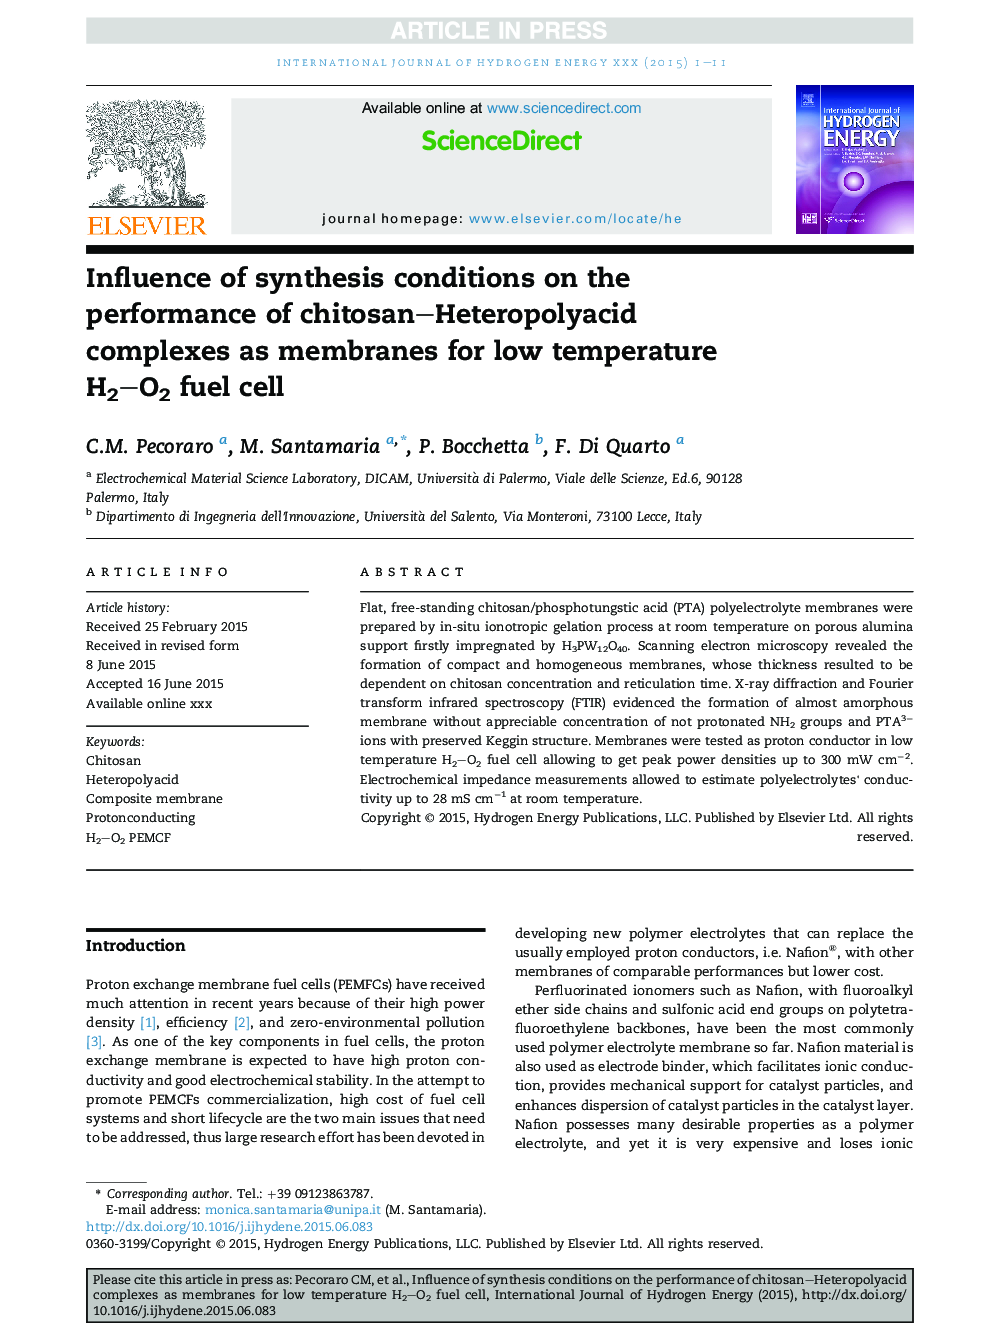 Influence of synthesis conditions on the performance of chitosan-Heteropolyacid complexes as membranes for low temperature H2-O2 fuel cell